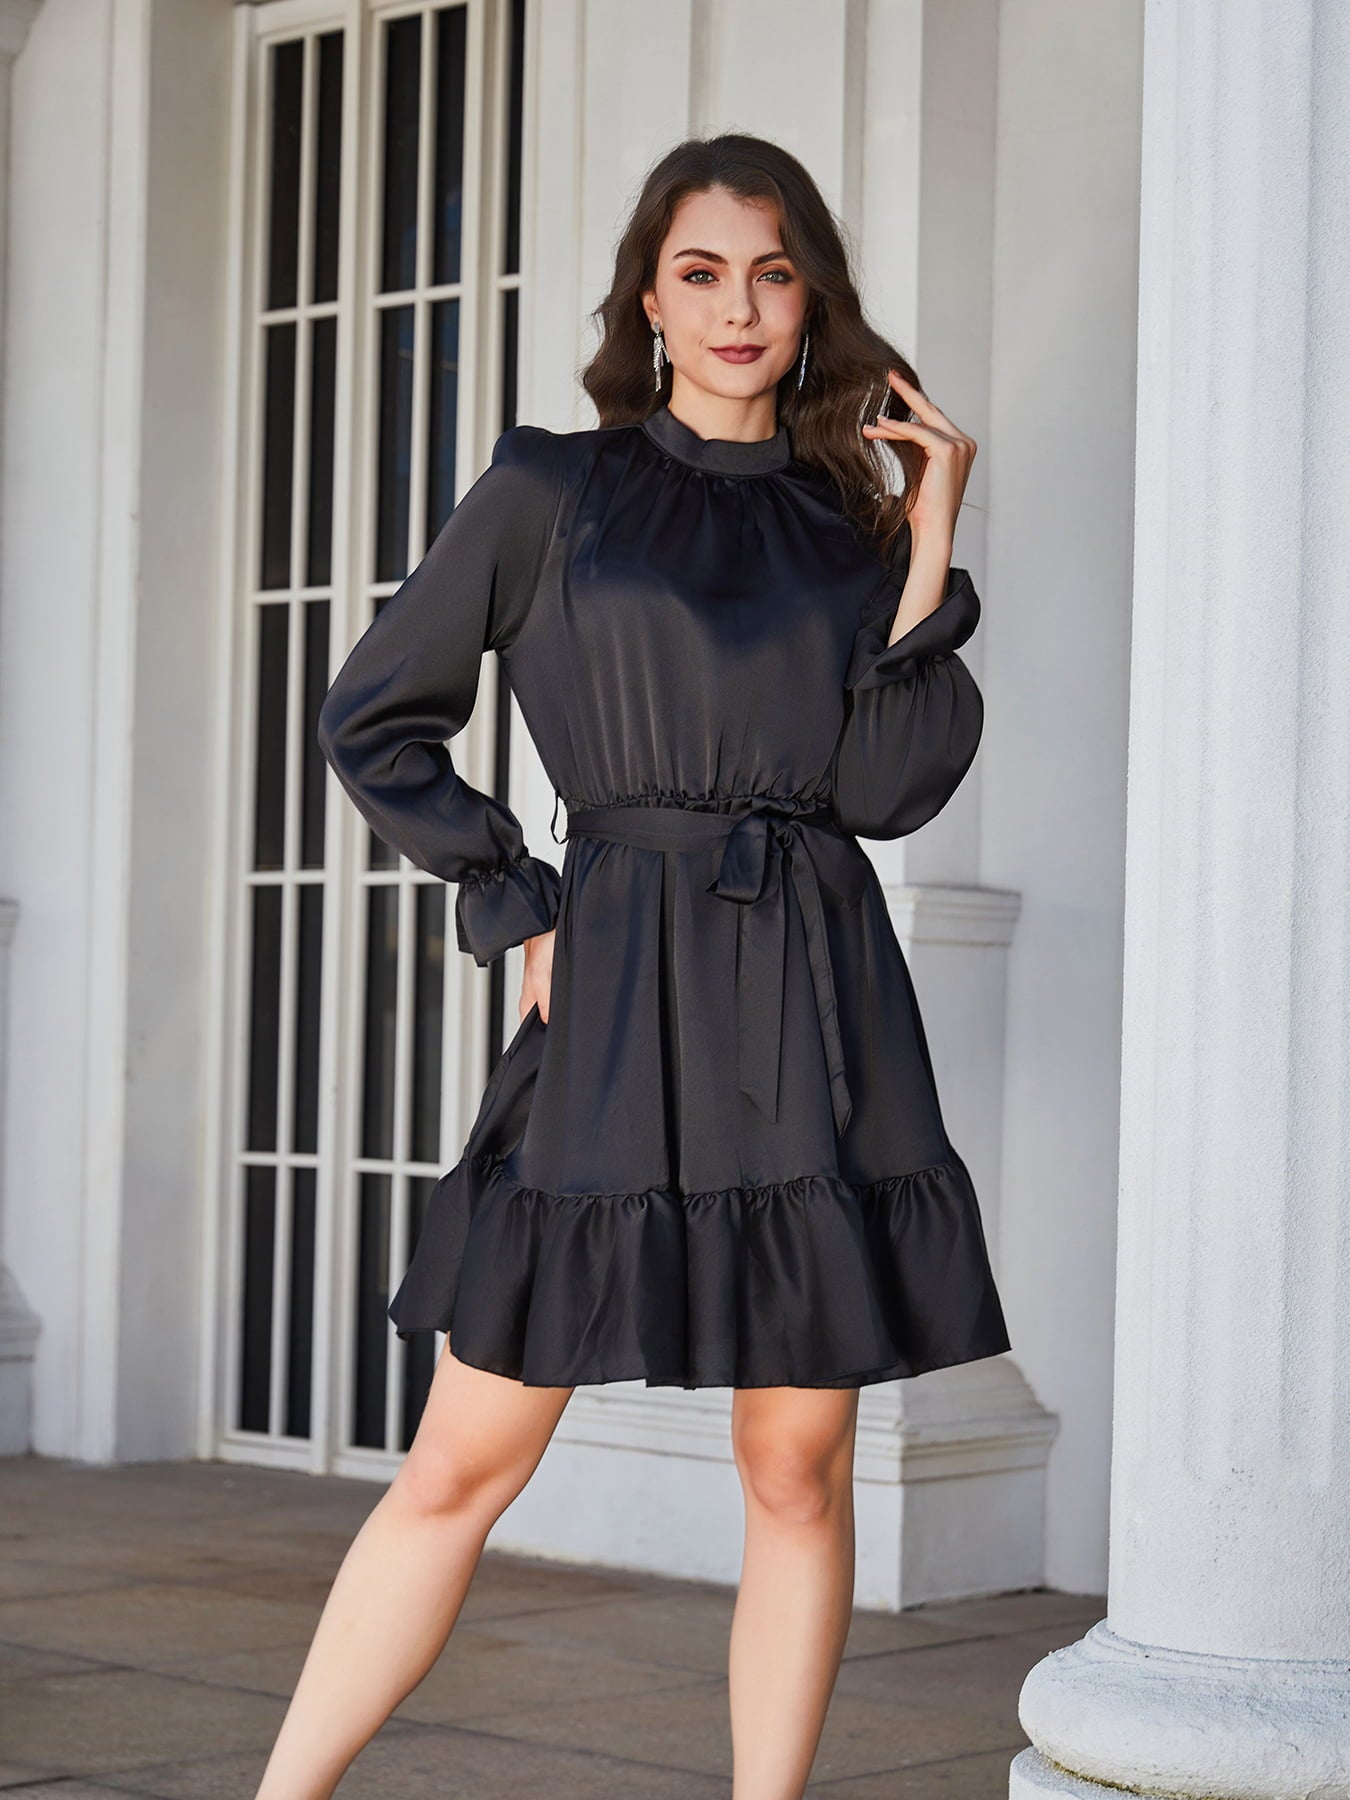 Express  Sweetheart Neck Ruffle Fit And Flare Sweater Dress in